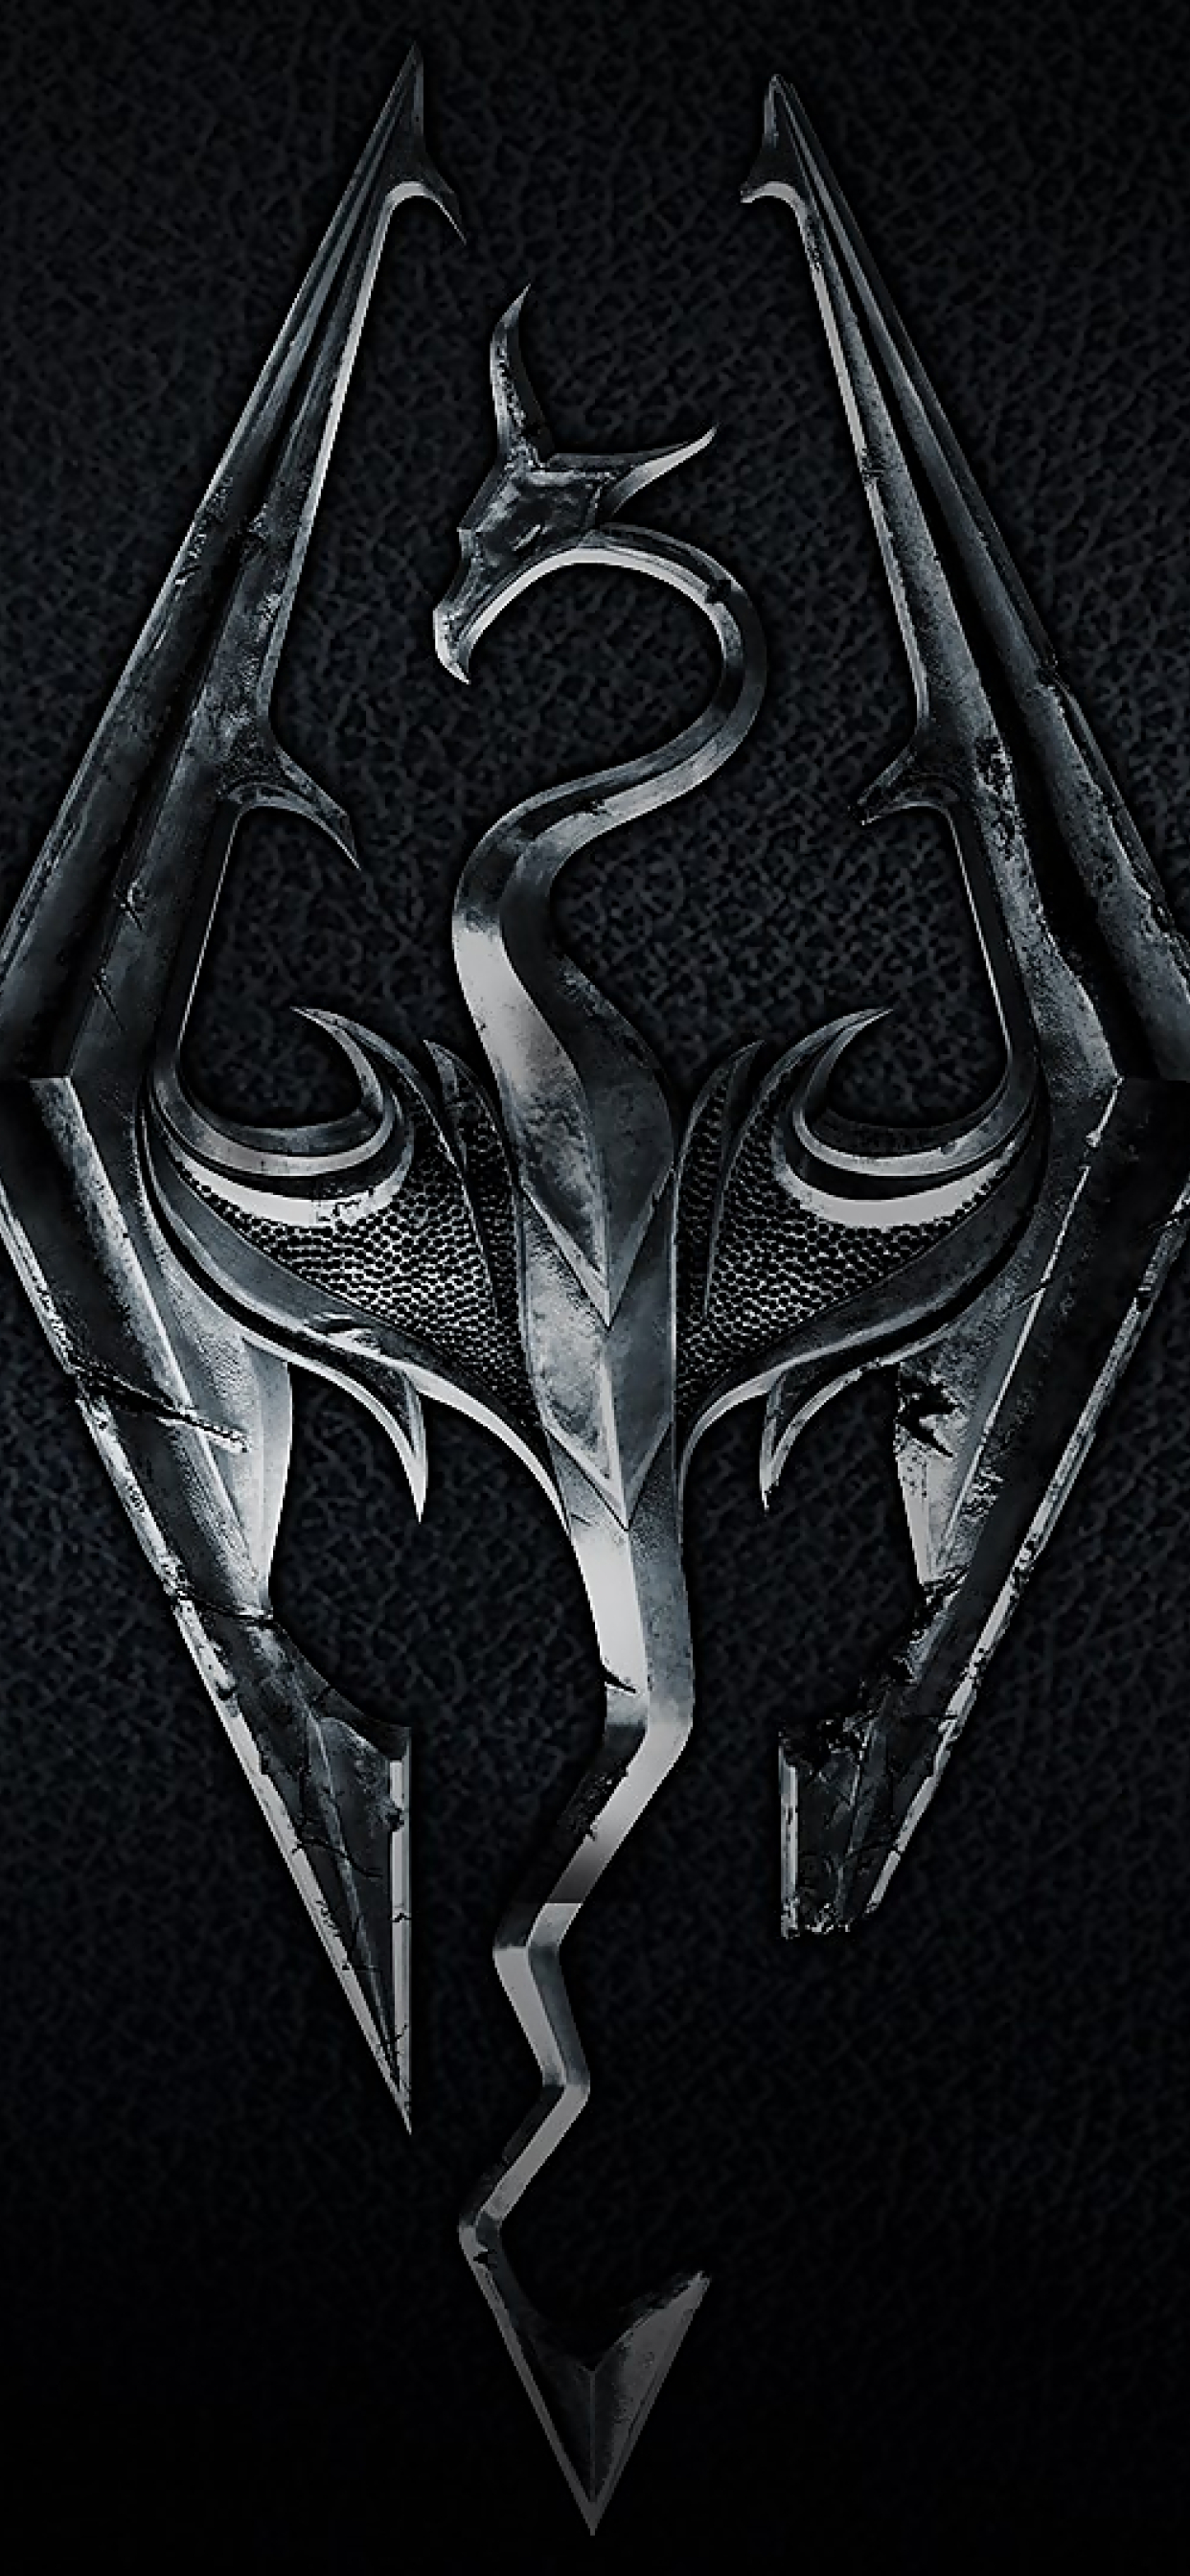 1242x26 The Elder Scrolls V Skyrim Iphone Xs Max Wallpaper Hd Games 4k Wallpapers Images Photos And Background